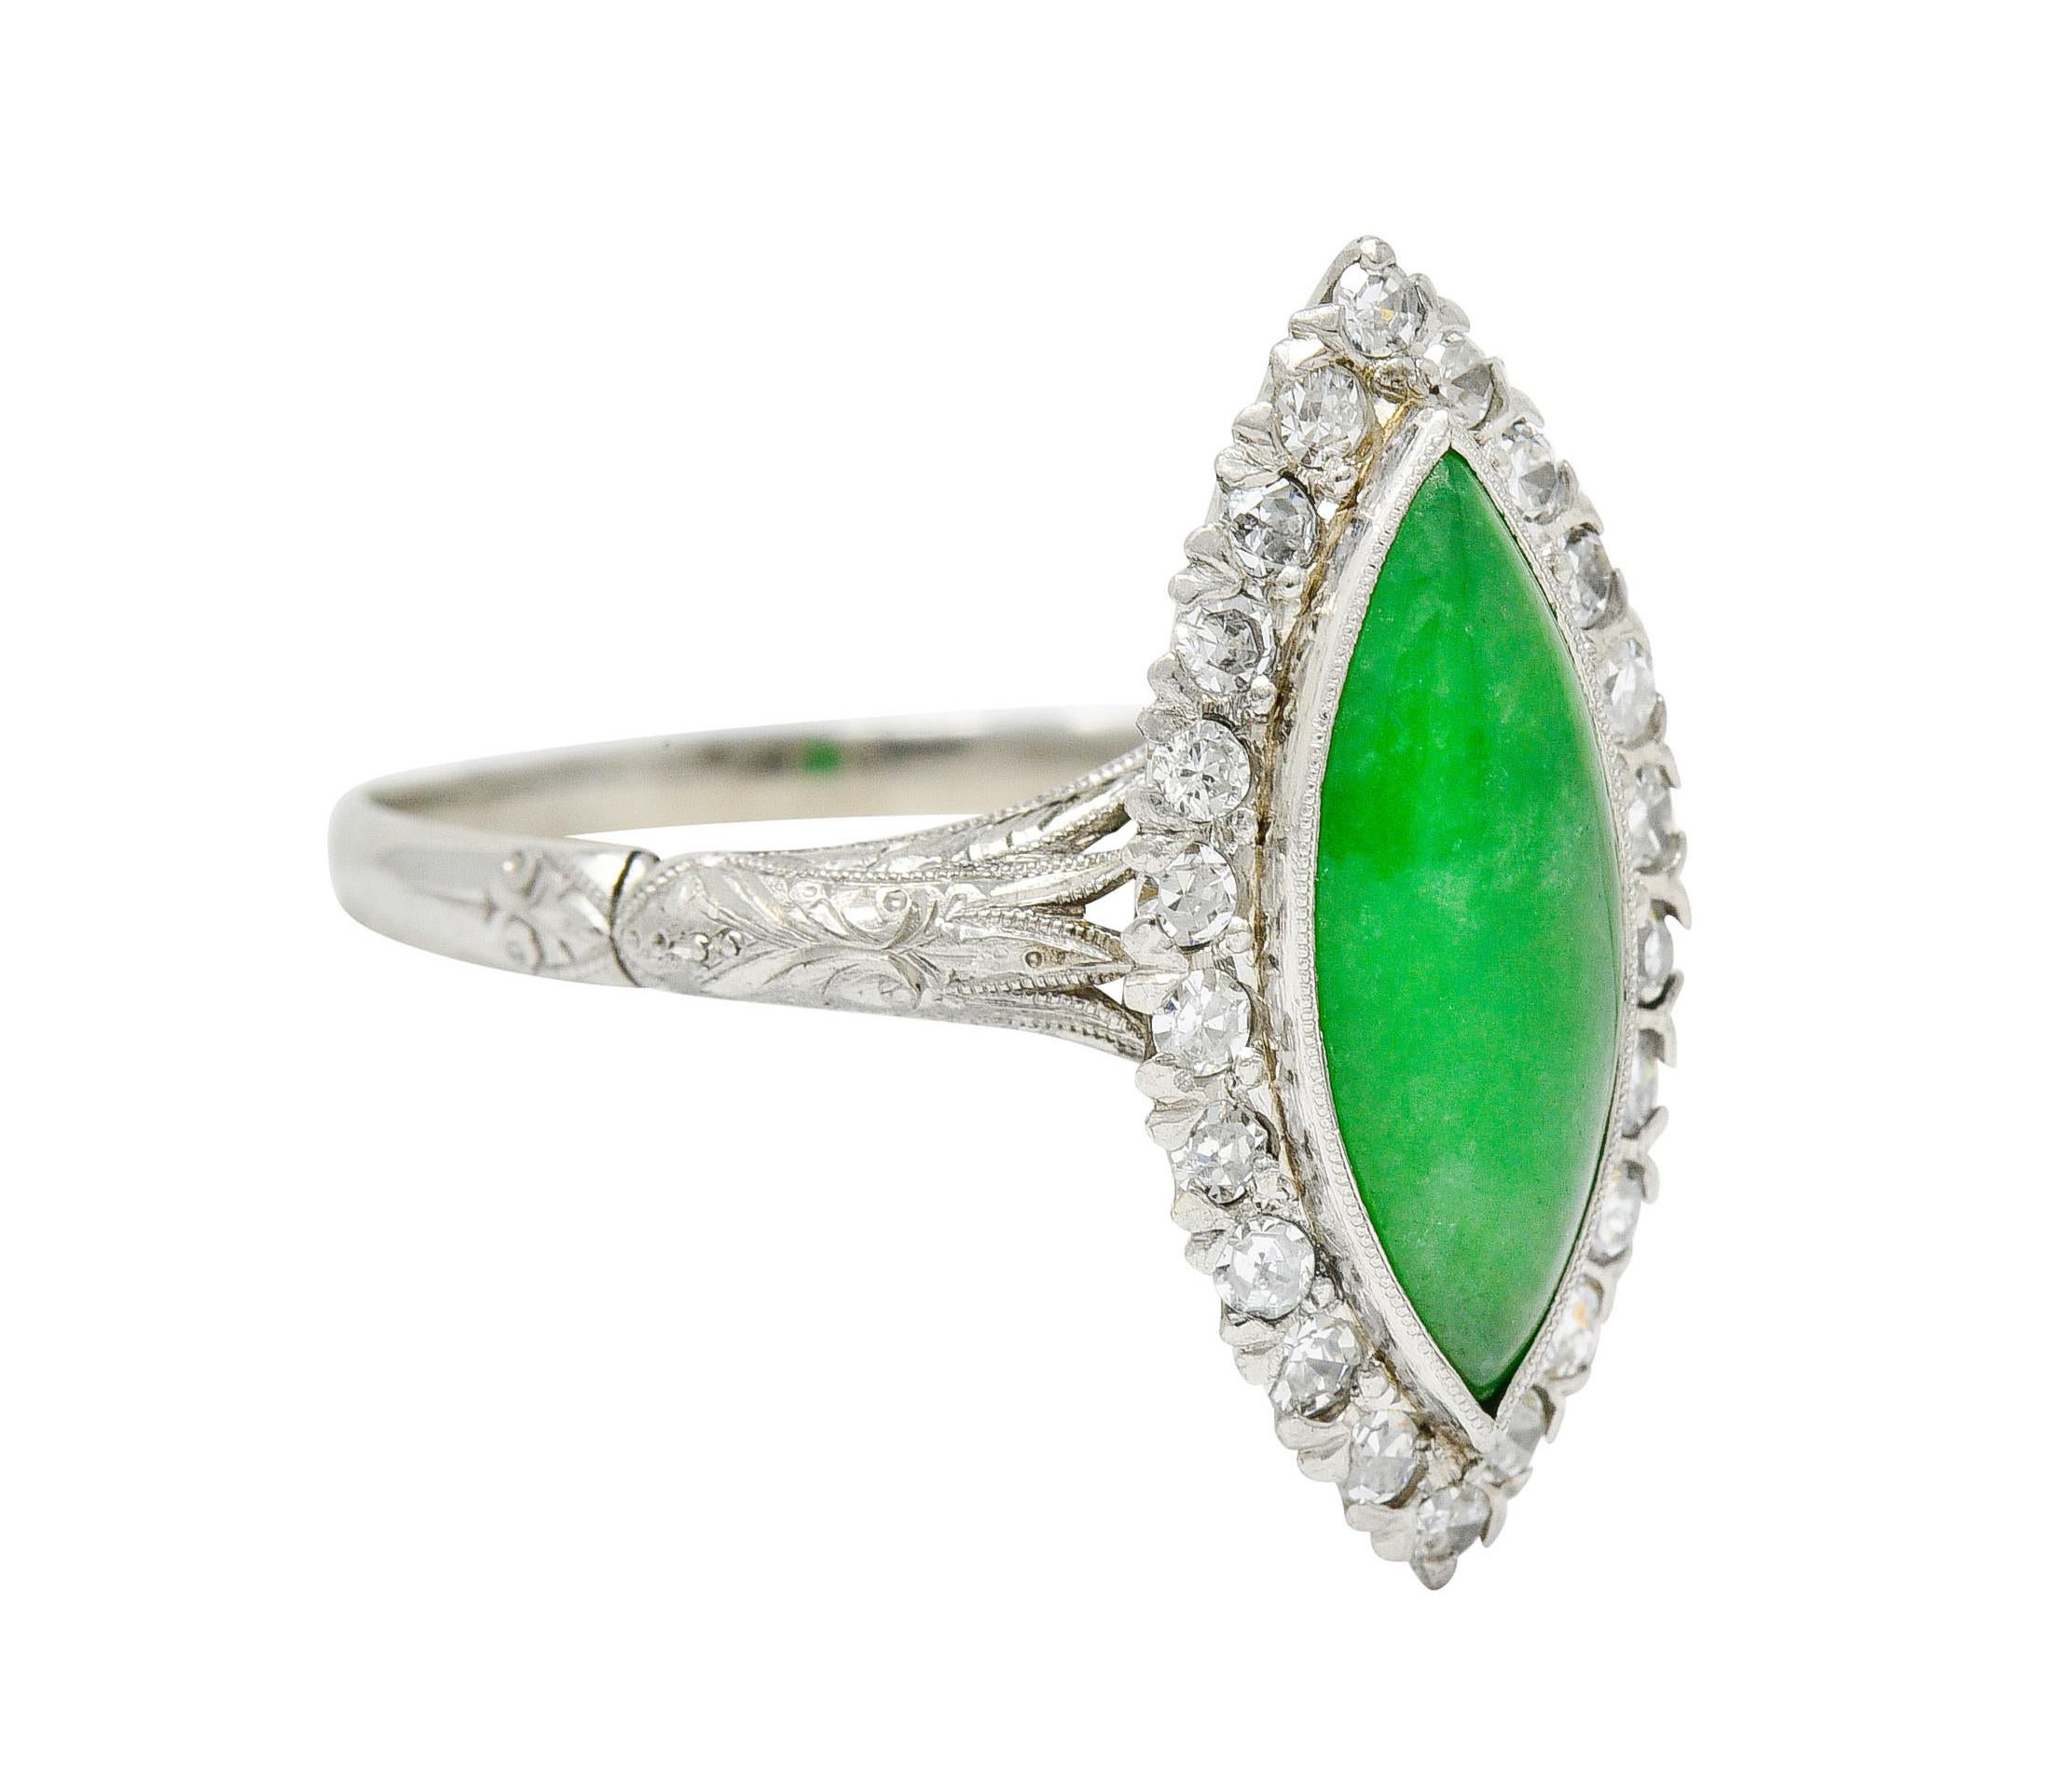 Cluster ring centers a bezel set navette cabochon of jade - measuring approximately 14.5 x 5.8 mm

Translucent with strong green color and subtle mottling

Surrounded by a halo of single cut and round brilliant cut diamonds

Weighing in total